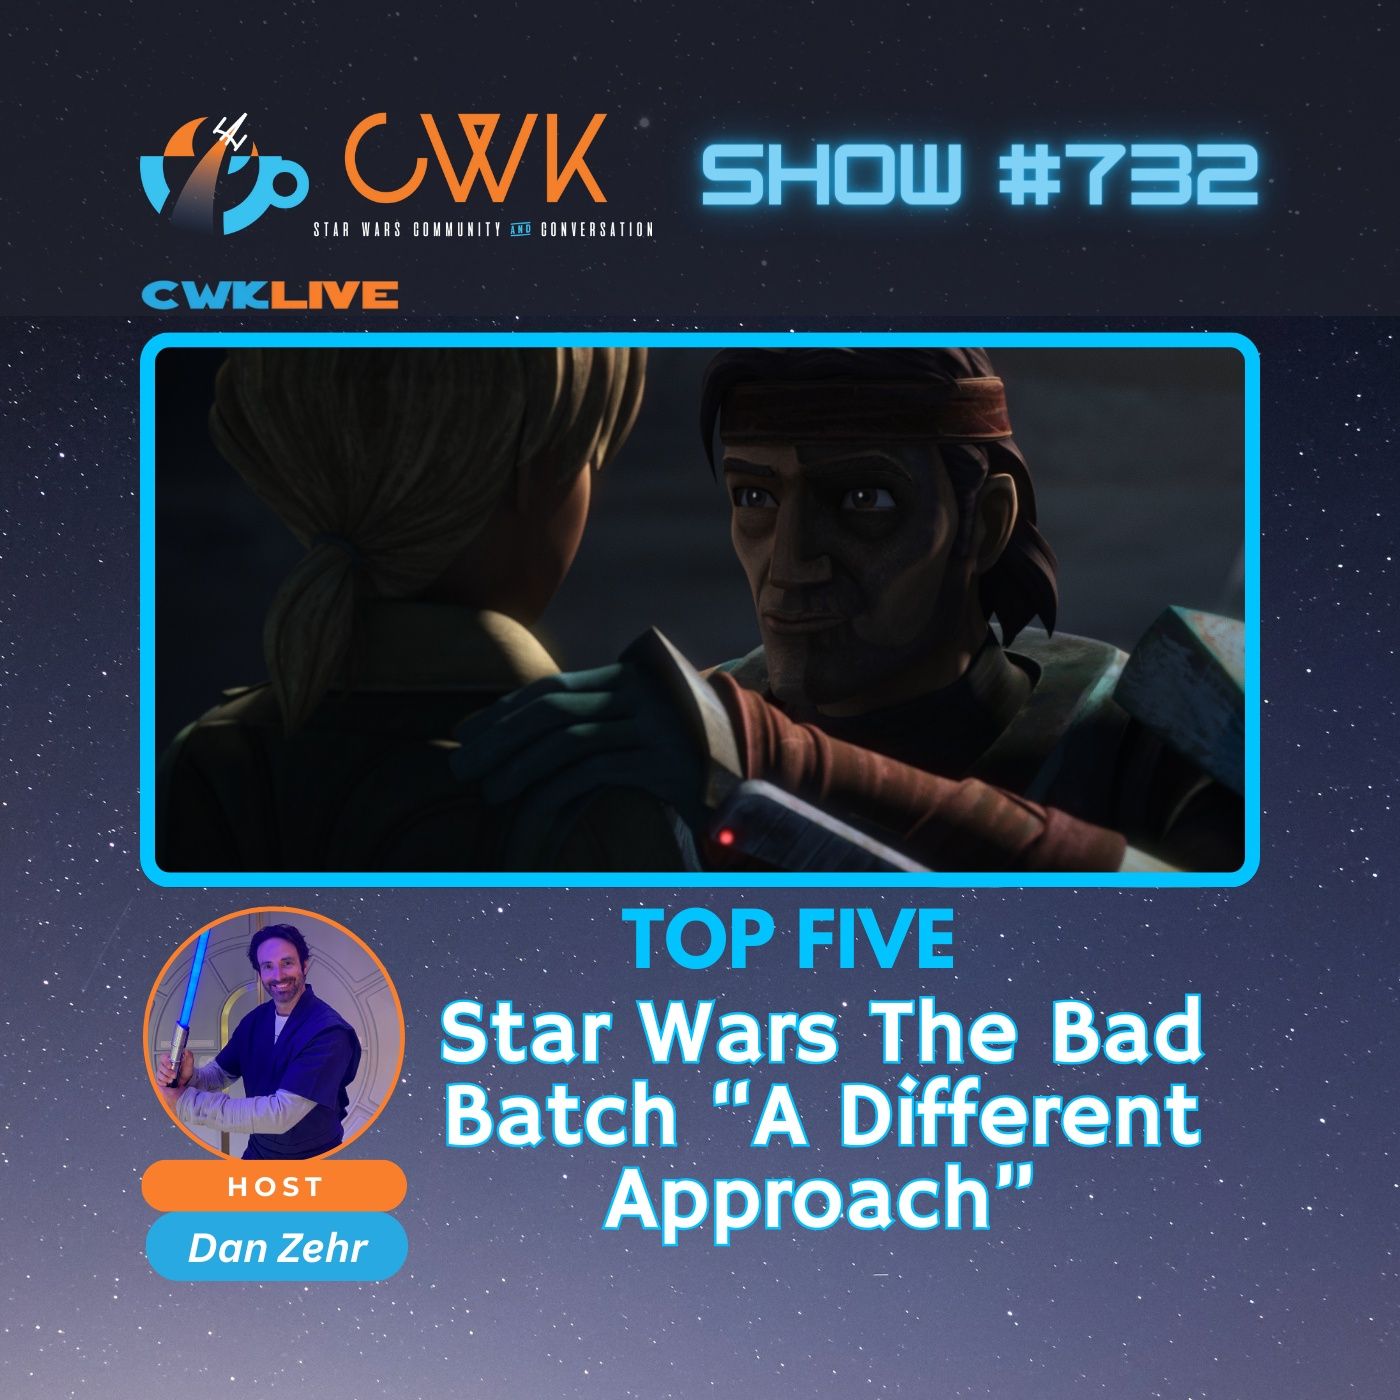 CWK Show #732 LIVE: Top Five Moments from The Bad Batch "A Different Approach"